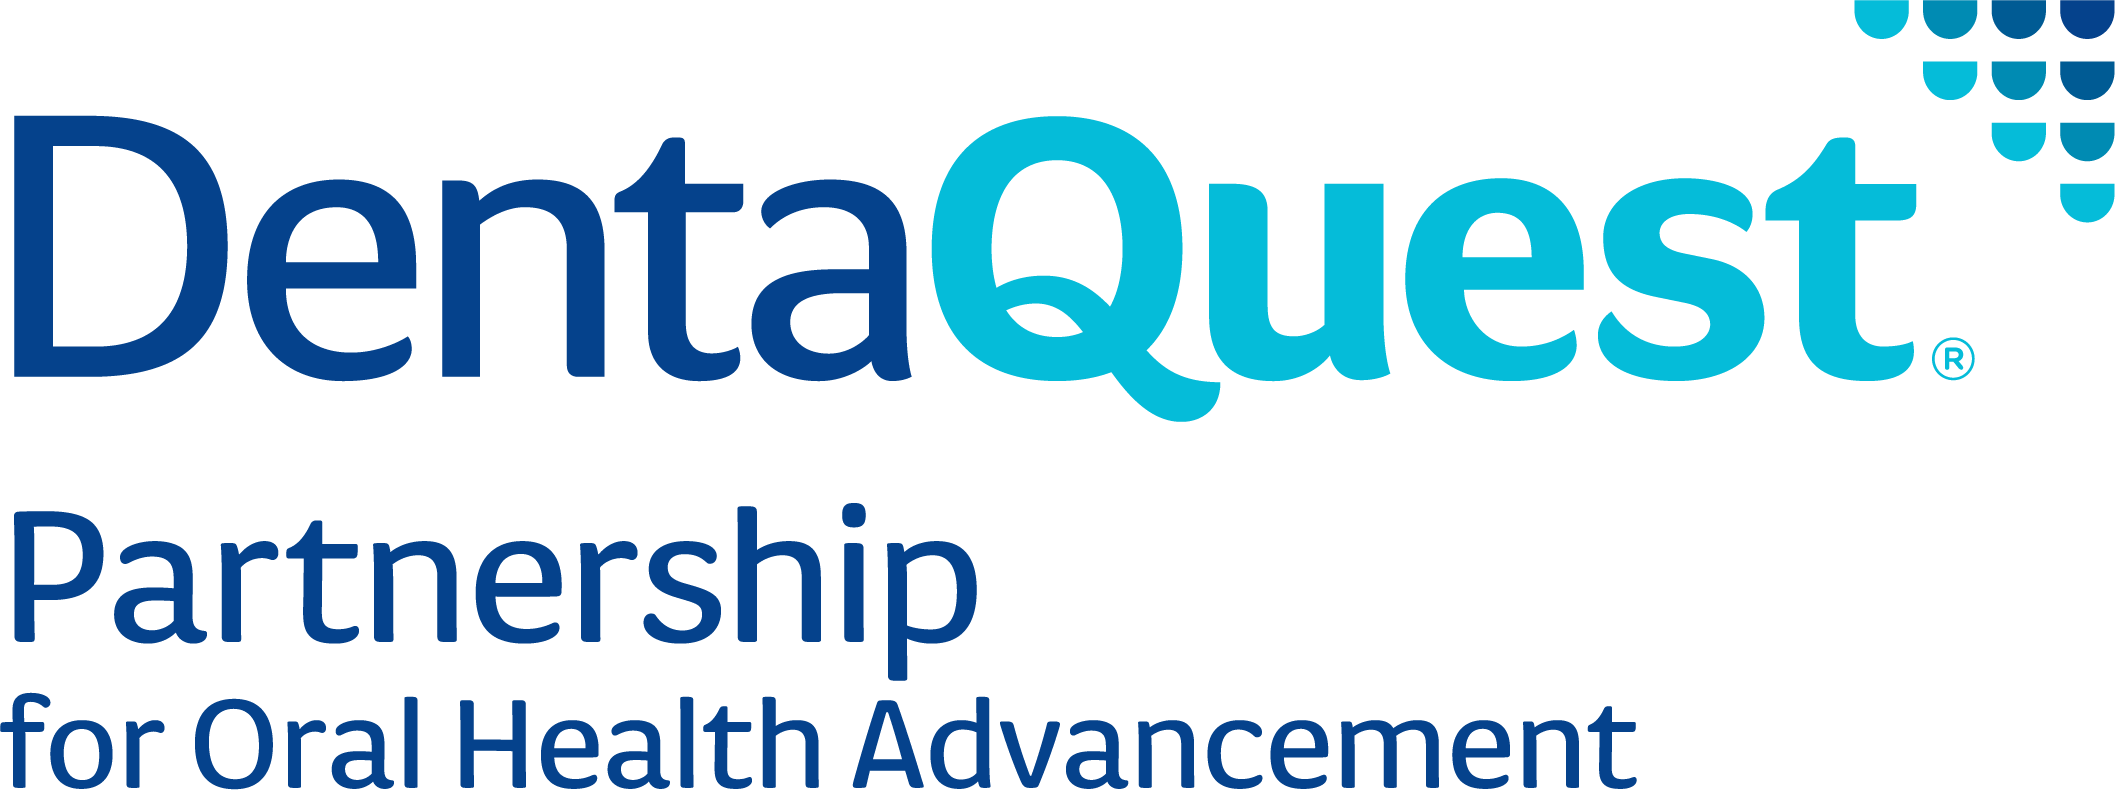 DentaQuest Partnership for Oral Health Excellence